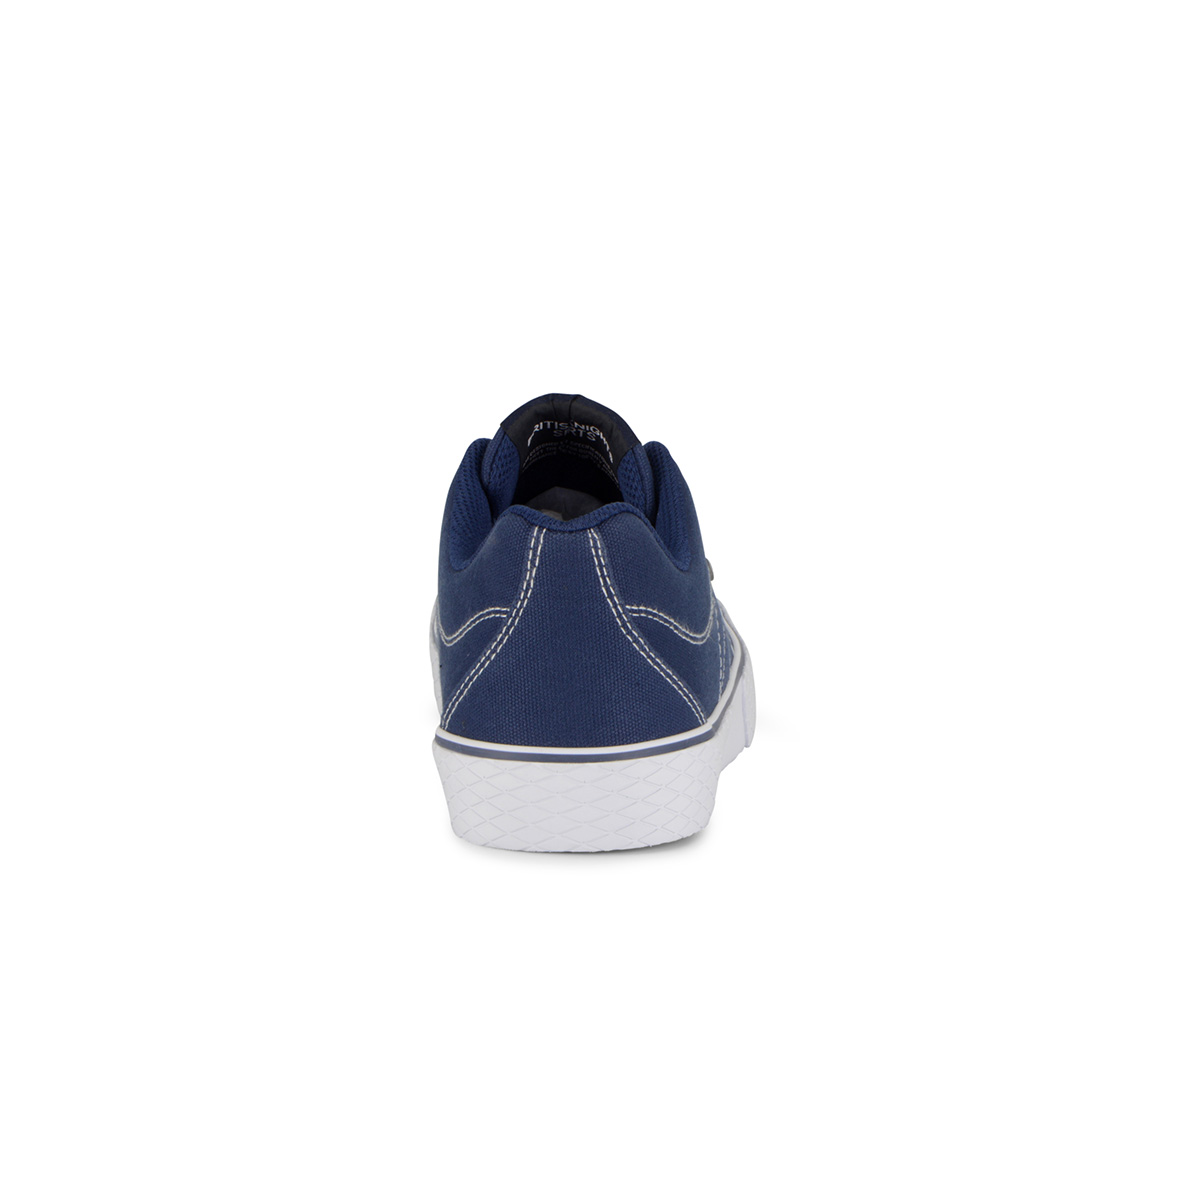 British Knights Men's Vulture 2 Canvas Sneaker Shoes - image 5 of 7